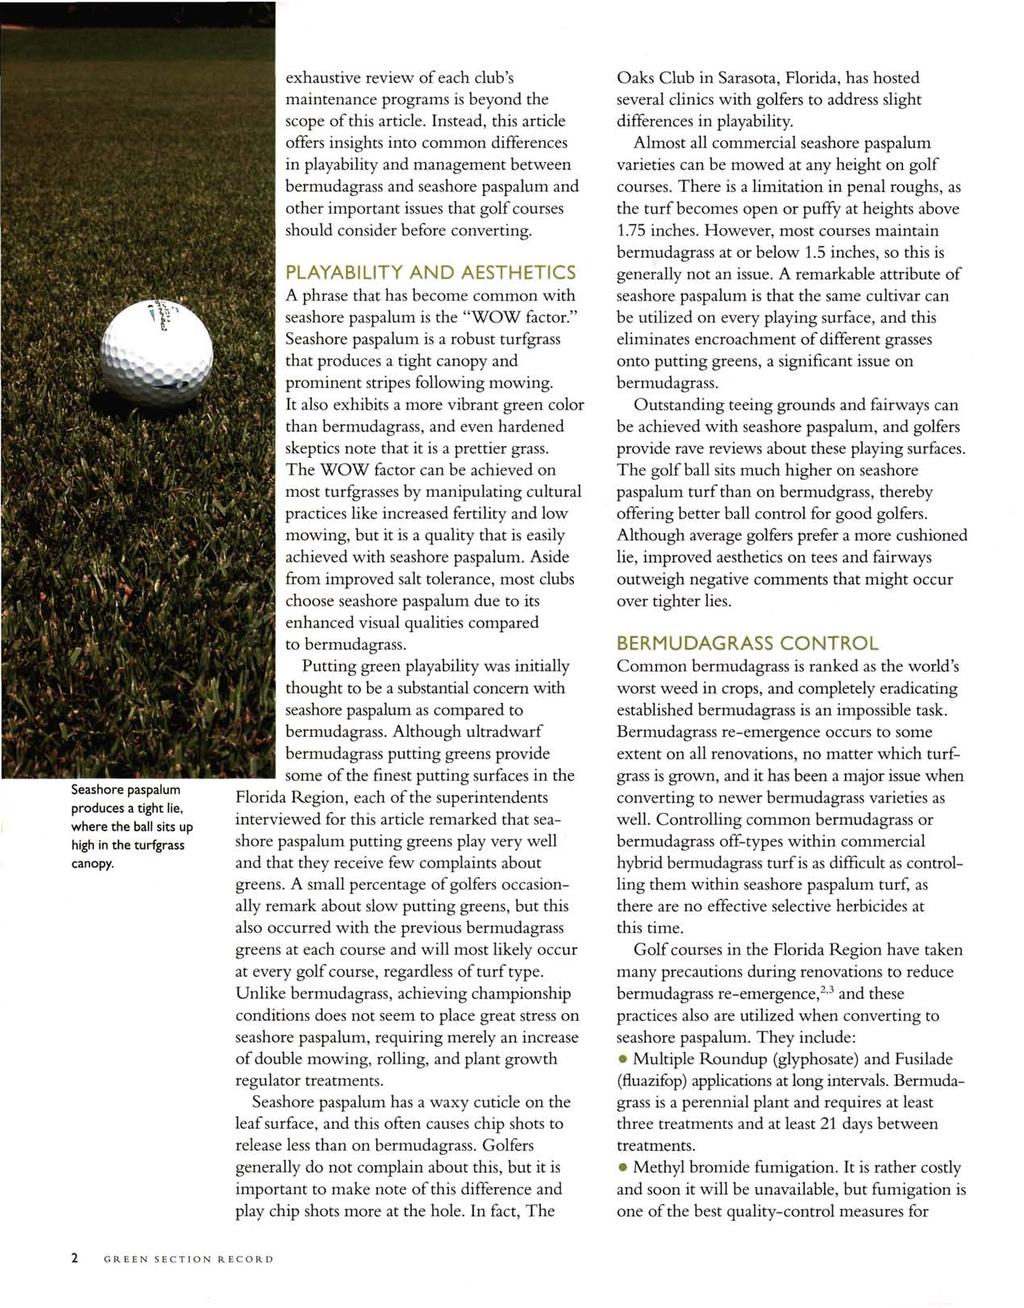 Seashore paspalum produces a tight lie, where the ball sits up high in the turfgrass canopy. exhaustive review of each club's maintenance programs is beyond the scope of this article.